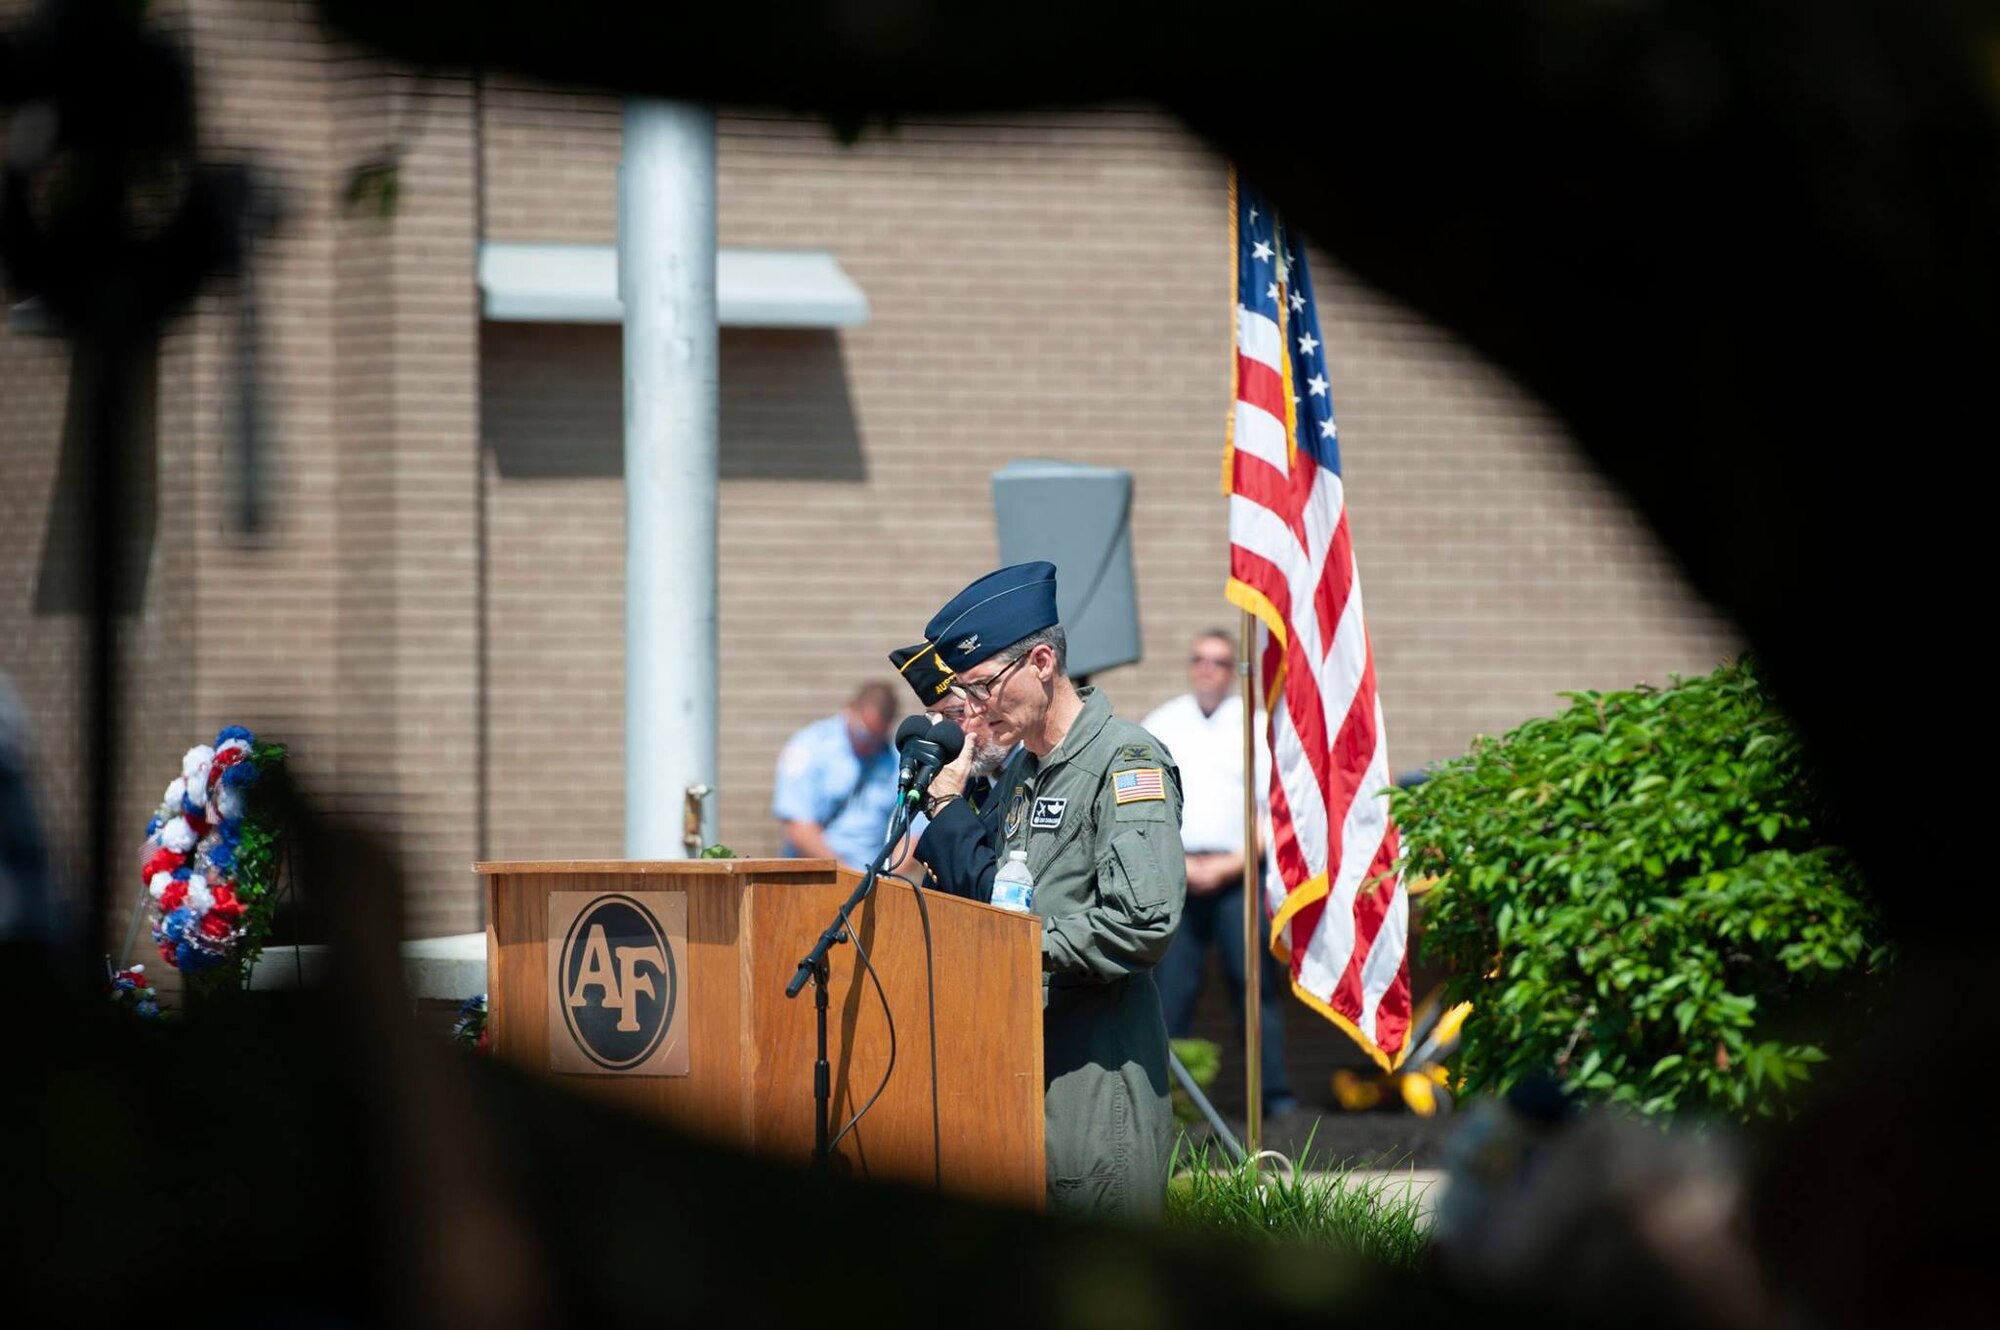 Col. Dan Sarachene, commander of the 910th Airlift Wing, based at Youngstown Air Reserve Station, Ohio, gives the keynote address at a Memorial Day ceremony in Austintown Township, May 28, 2018.